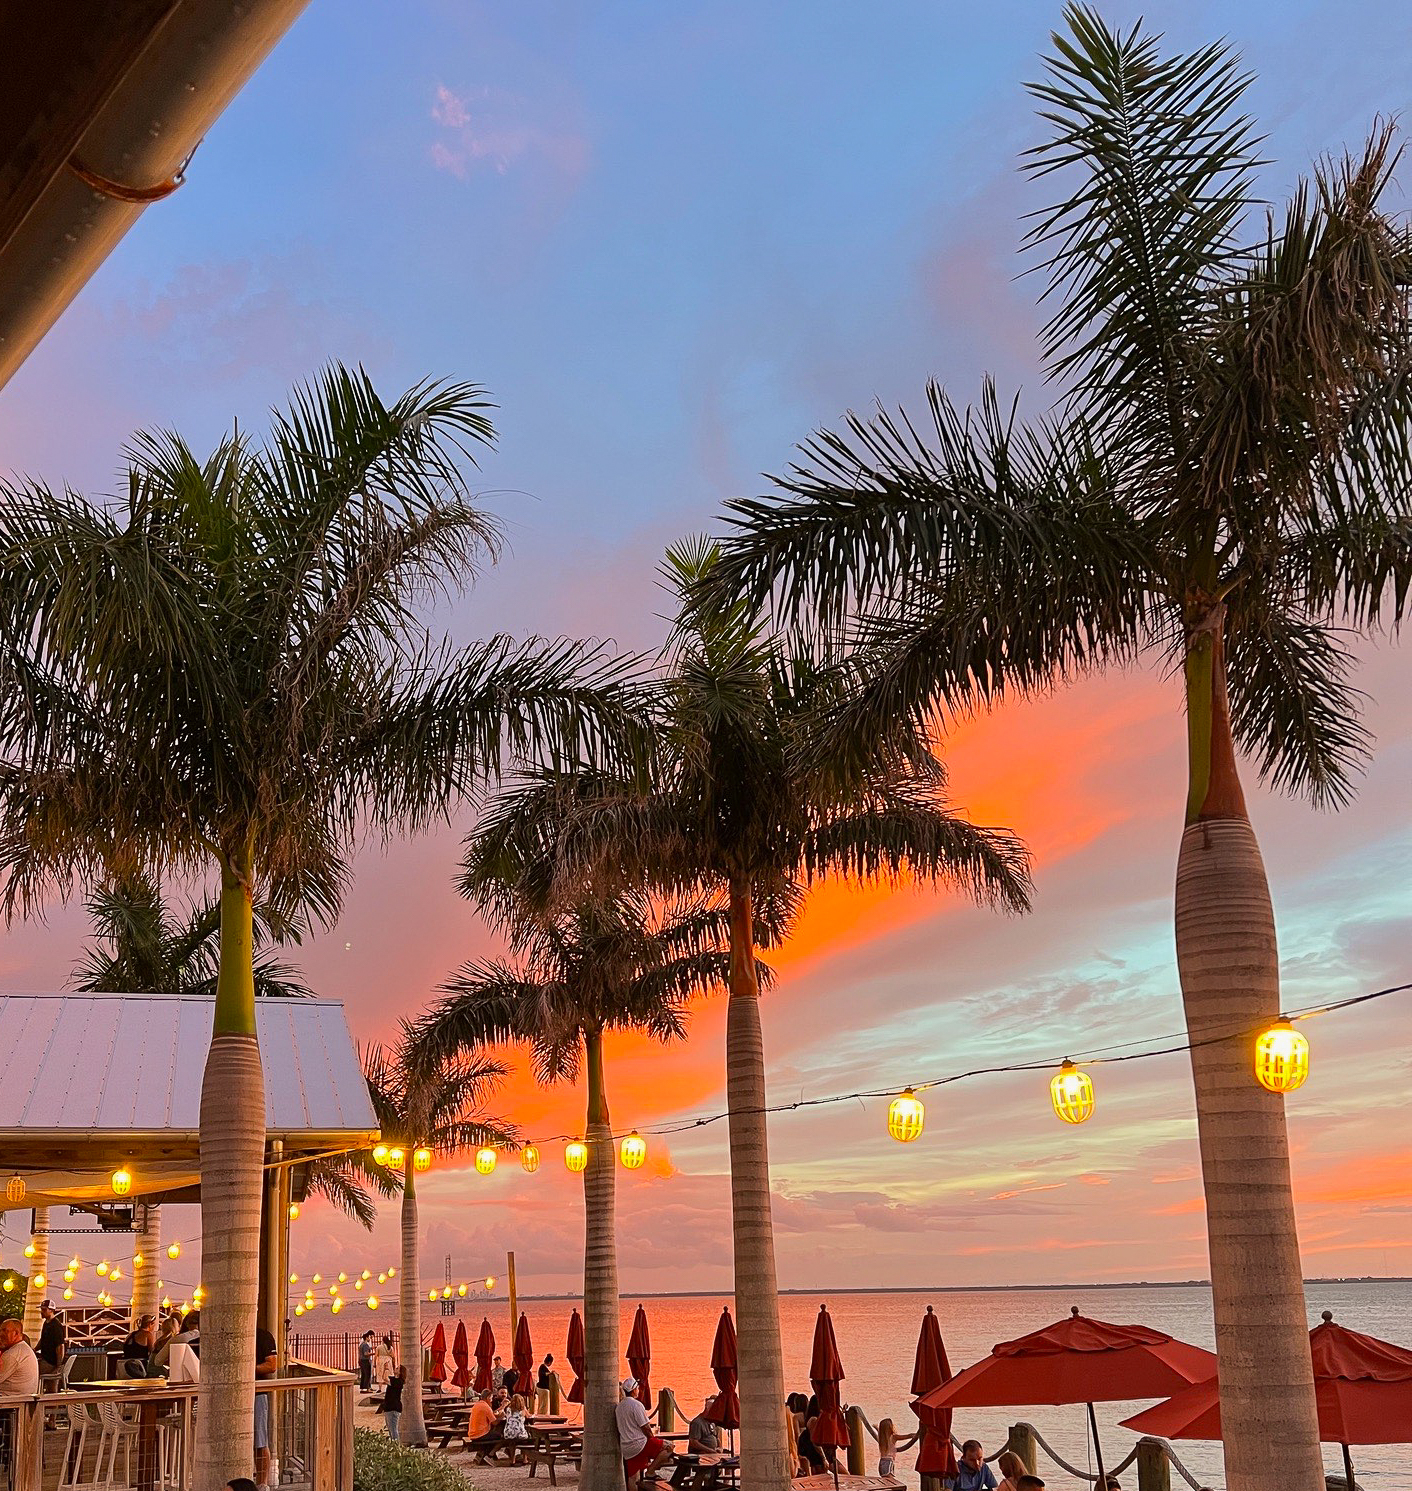 Soak Up the Island Vibes at This Waterfront Restaurant in Tampa: Salt Shack on the Bay